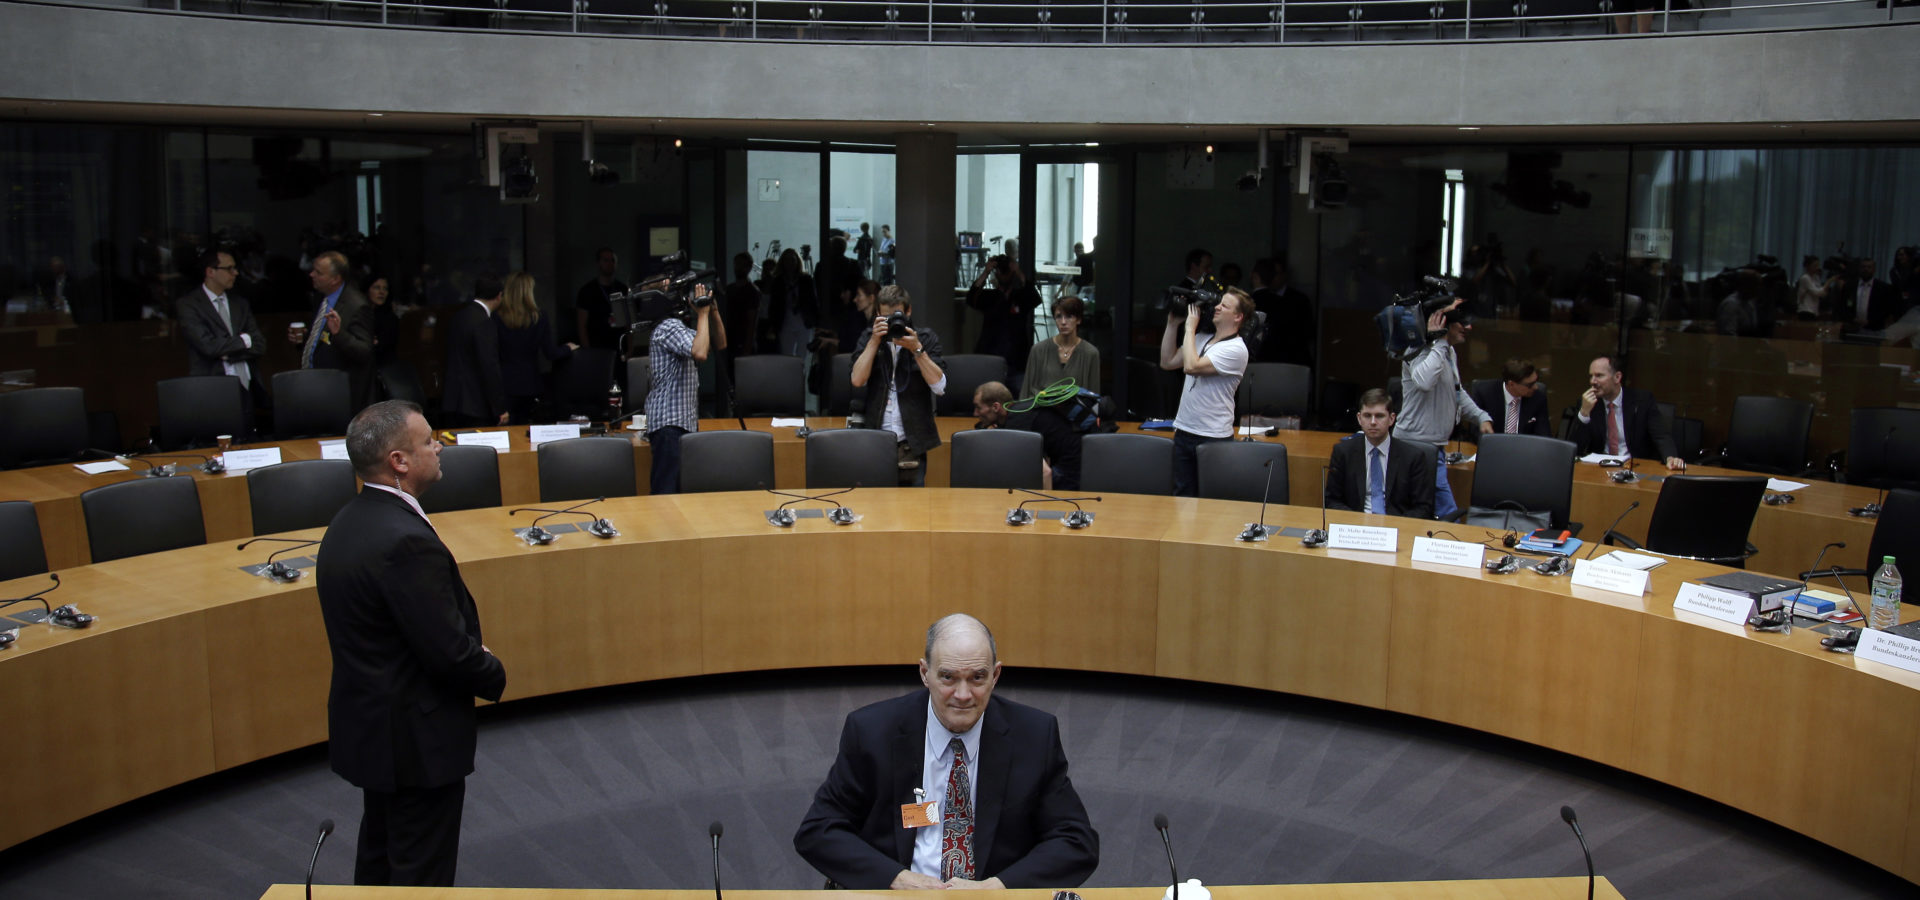 A police officer stands next to former US National Security Agency, NSA, employee William Binney, center, as Binney waits for his questioning by the German parliamentary NSA investigation committee in Berlin, Germany, Thursday, July 3, 2014. The committee investigates the NSA surveillance activities, that also included the tapping of German Chancellor Angela Merkel. (AP Photo/Michael Sohn)